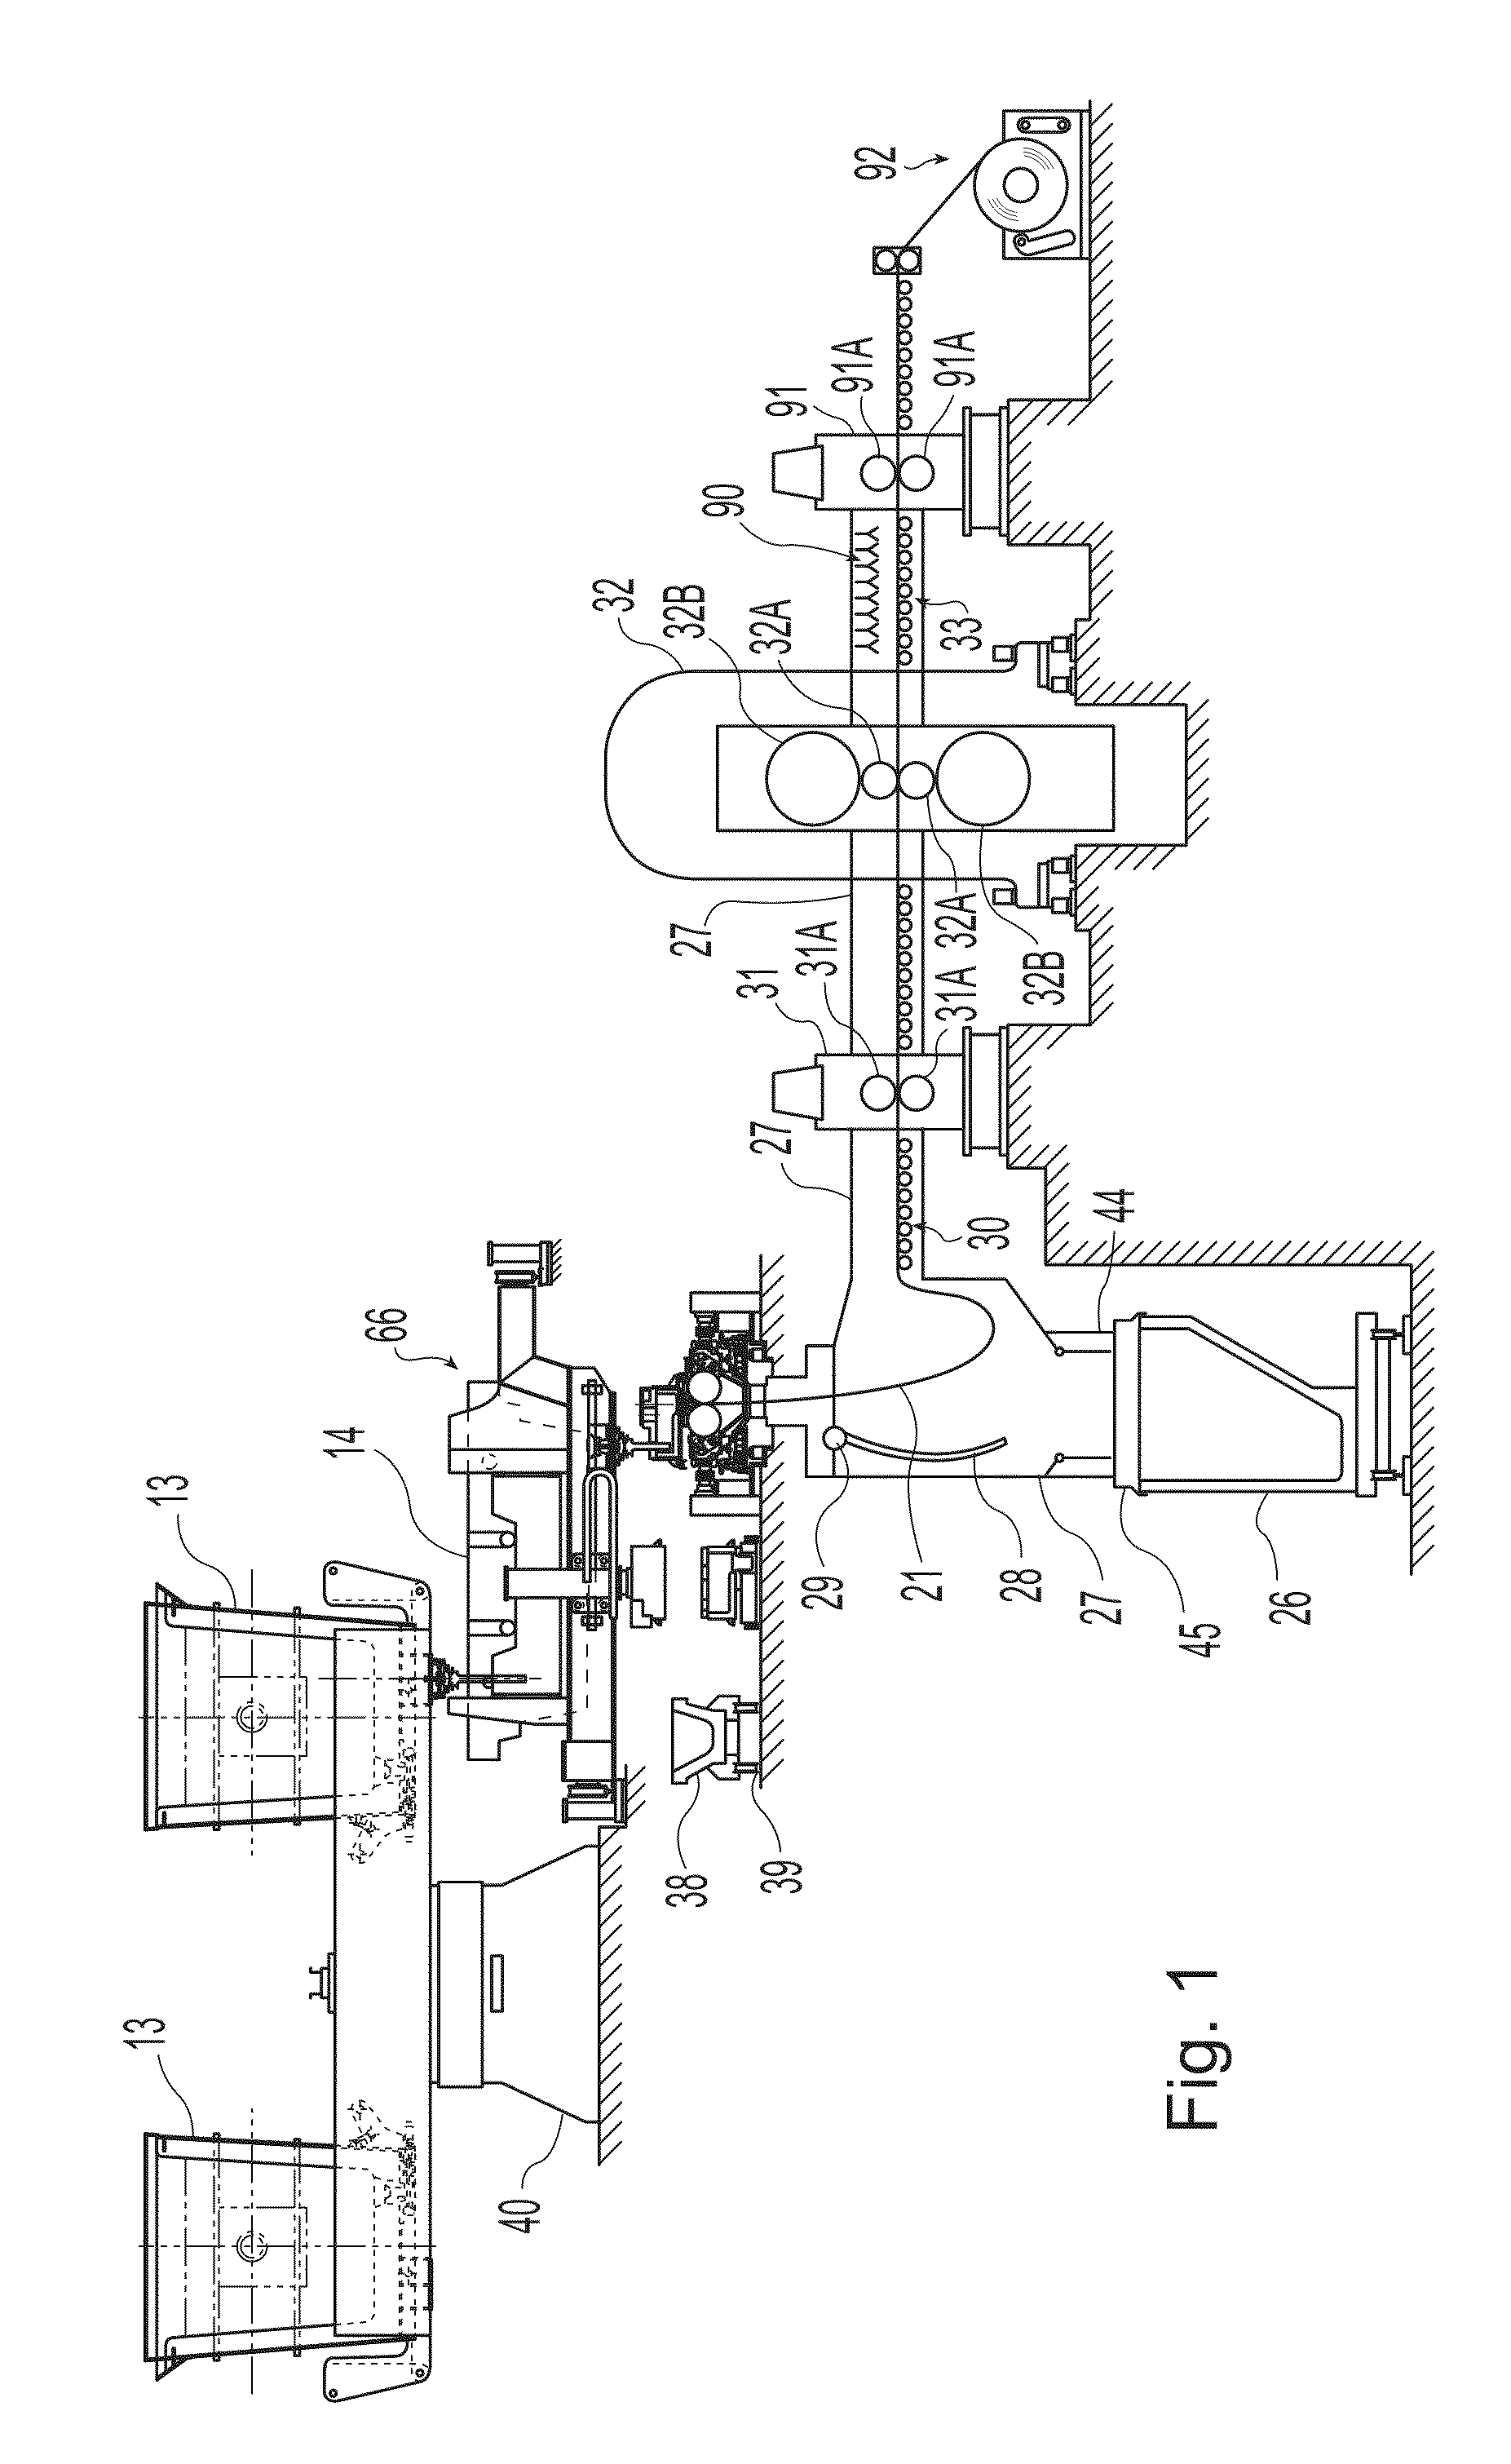 Strip casting apparatus with improved side dam